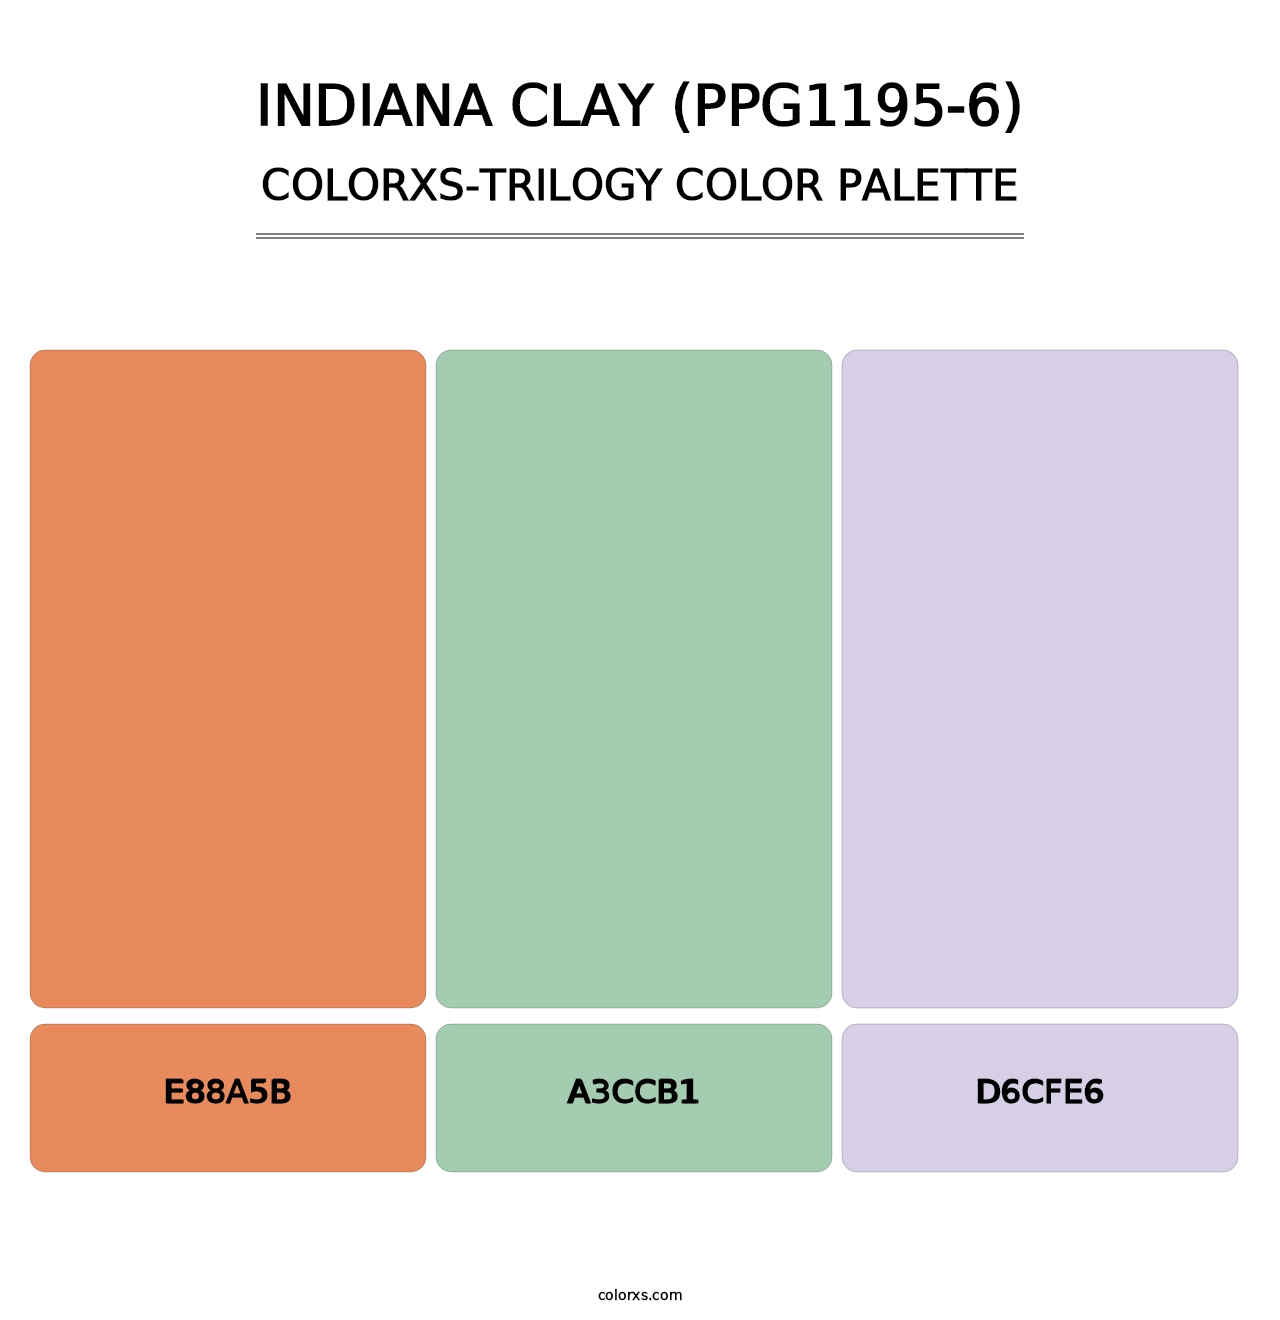 Indiana Clay (PPG1195-6) - Colorxs Trilogy Palette